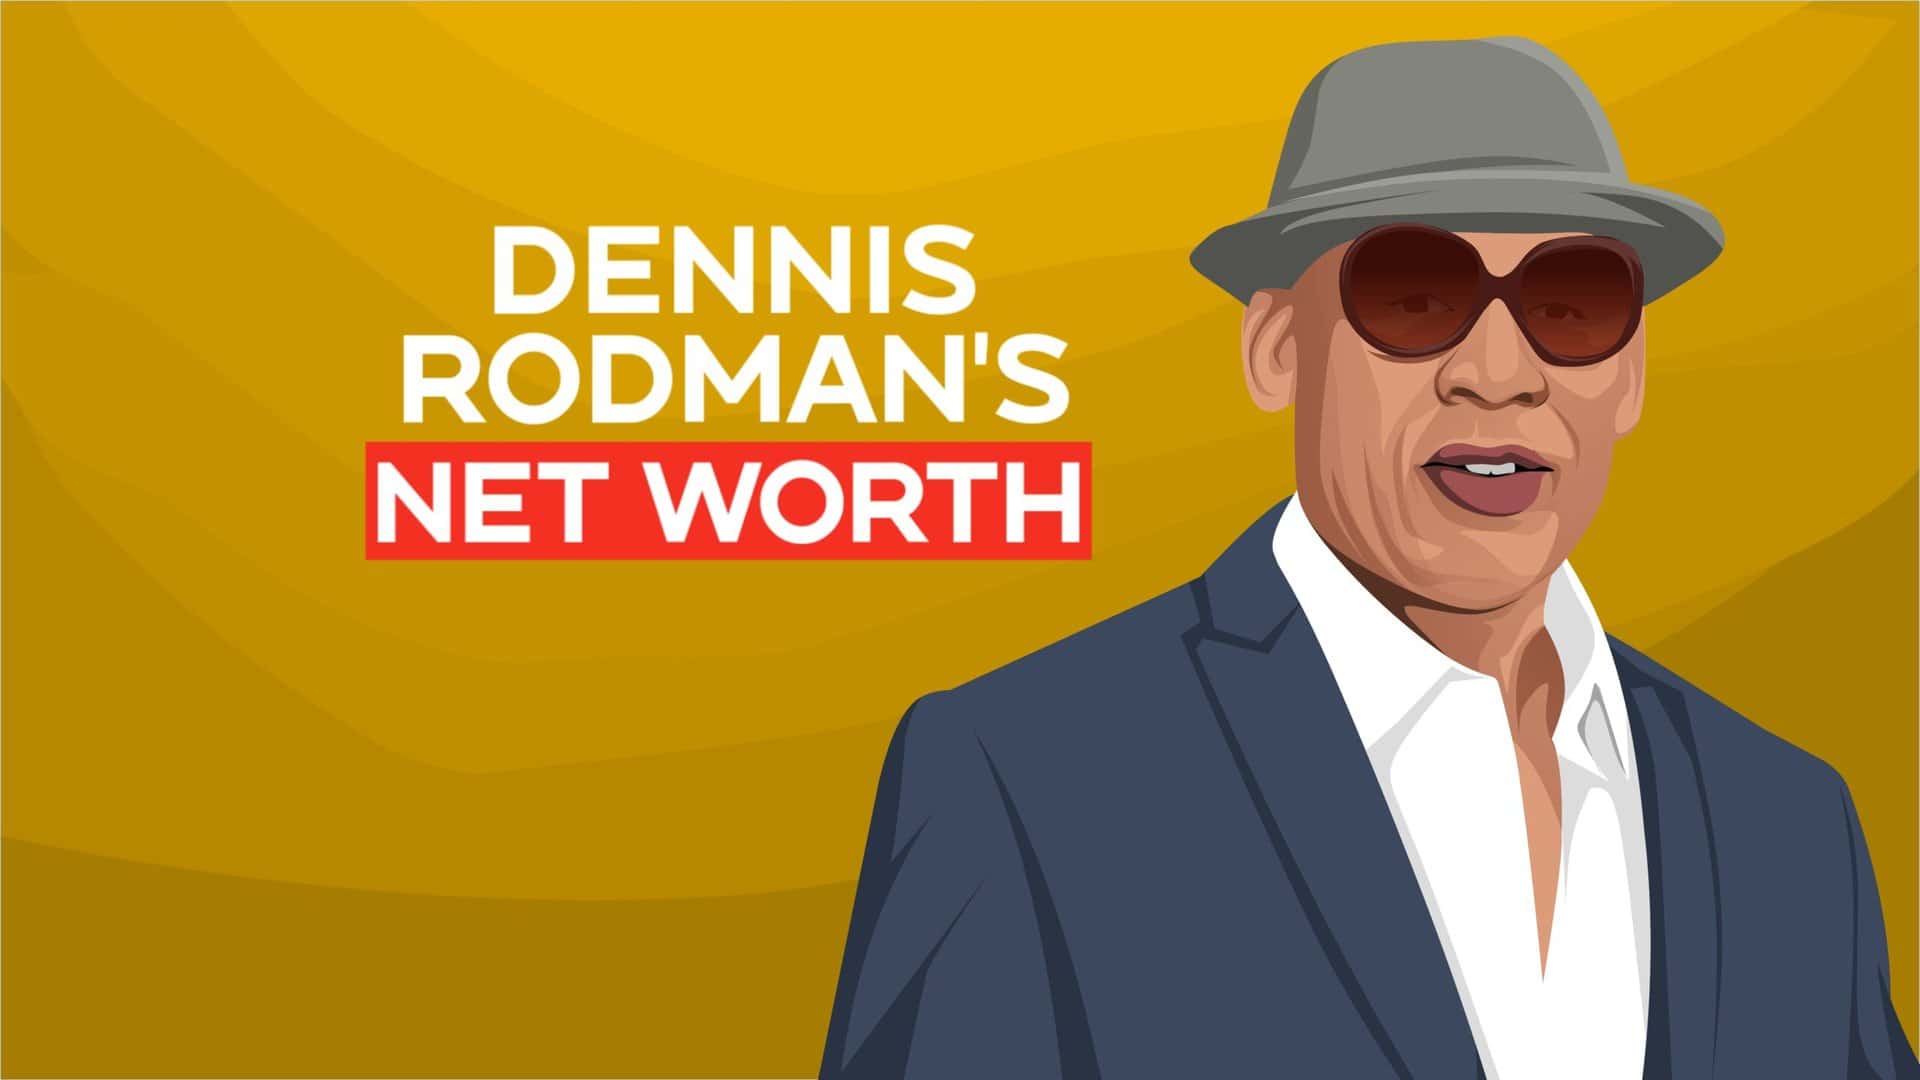 Dennis Rodman's Worm Nickname Had Nothing to Do With His Defense -  Basketball Network - Your daily dose of basketball